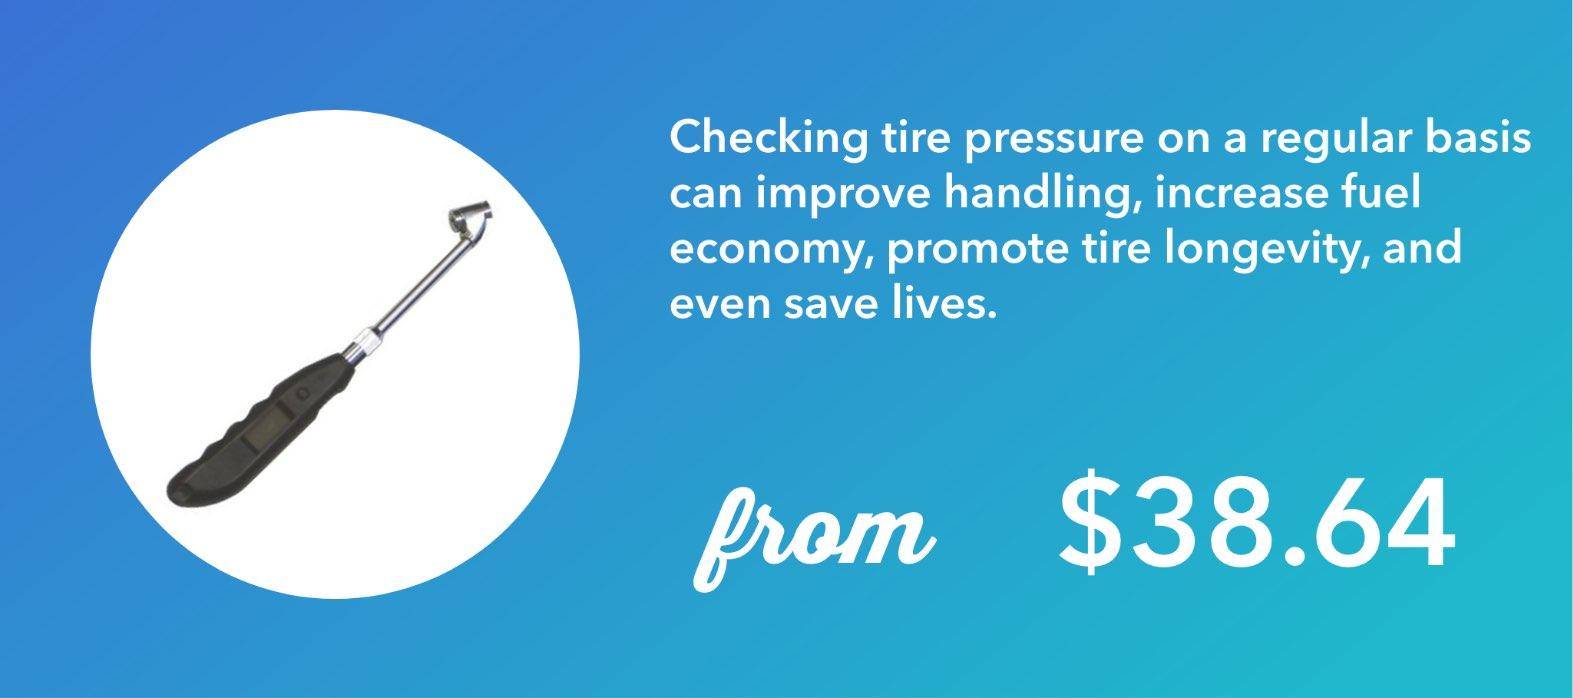 Checking tire pressure on a regular basis can improve handling, increase fuel economy, promote tire longevity, and even save lives.